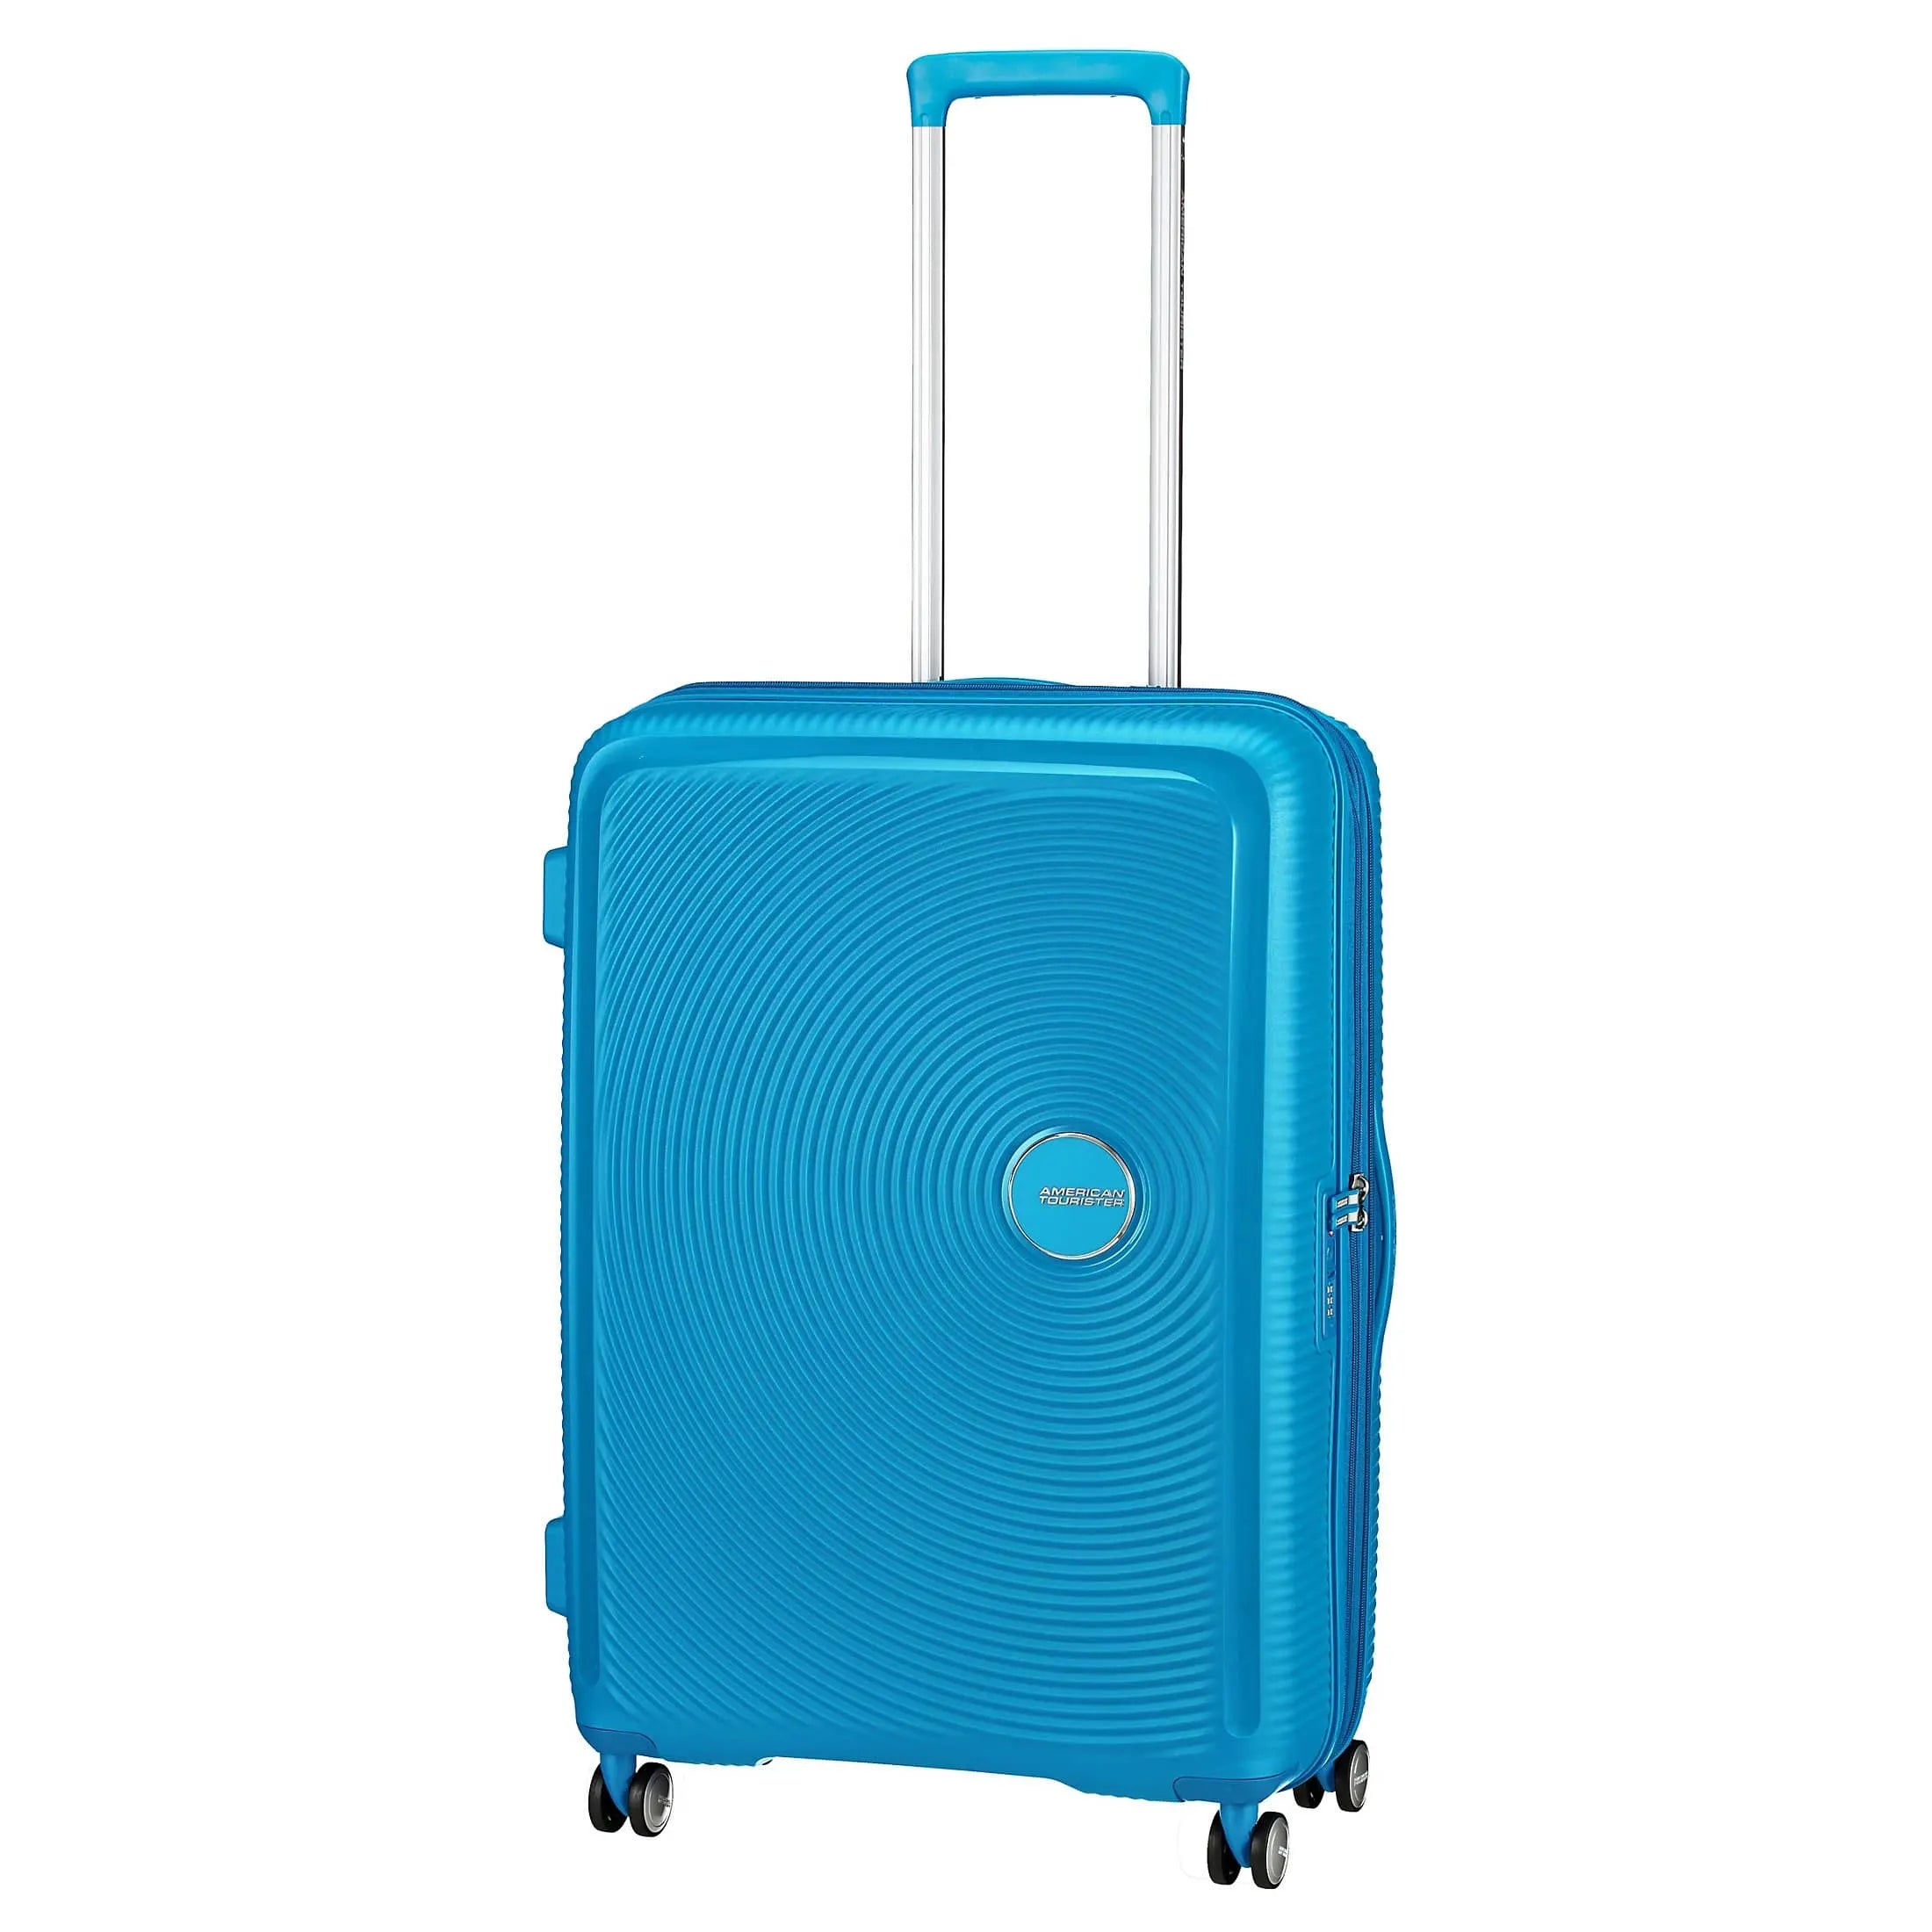 American Tourister Soundbox 4-wheel trolley 67 cm - coral red